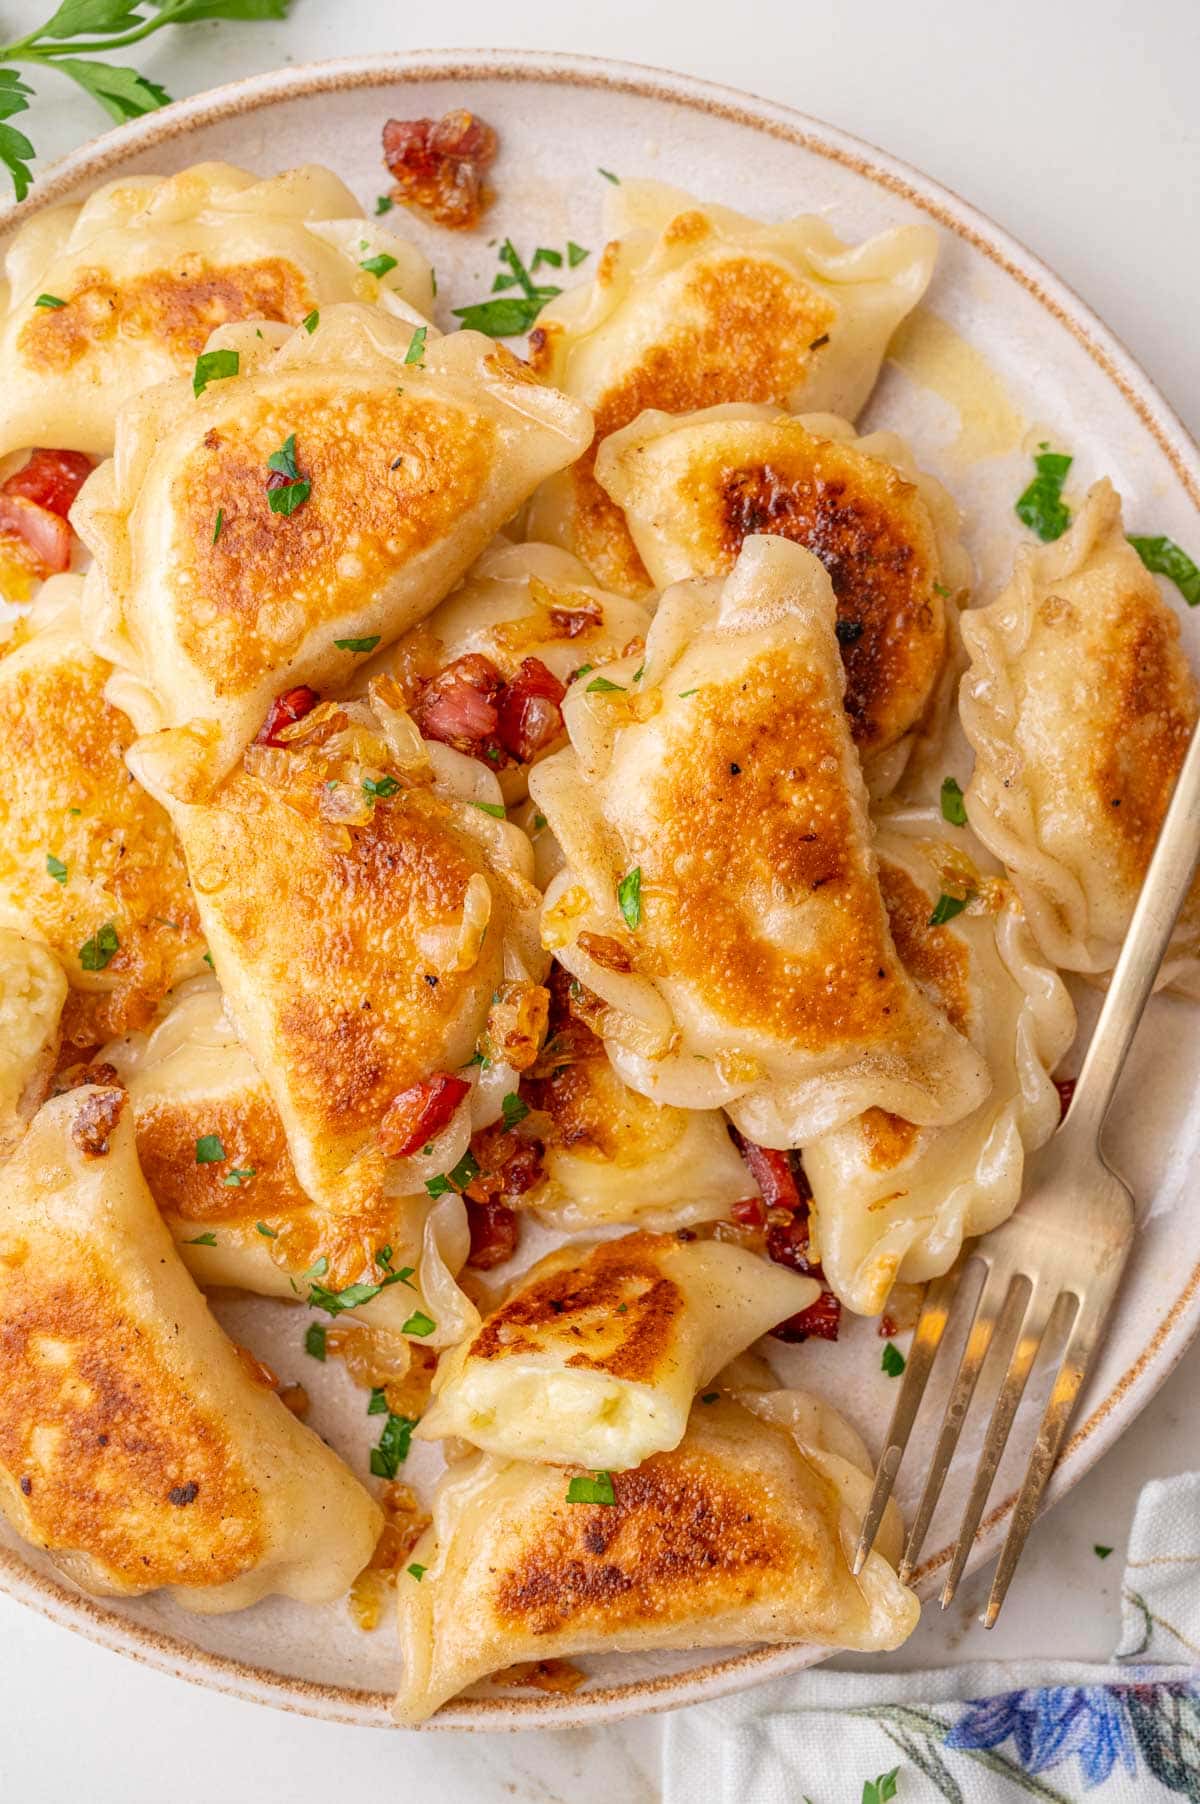 Pan fried potato and cheese pierogi with bacon and onion topping on a beige plate.